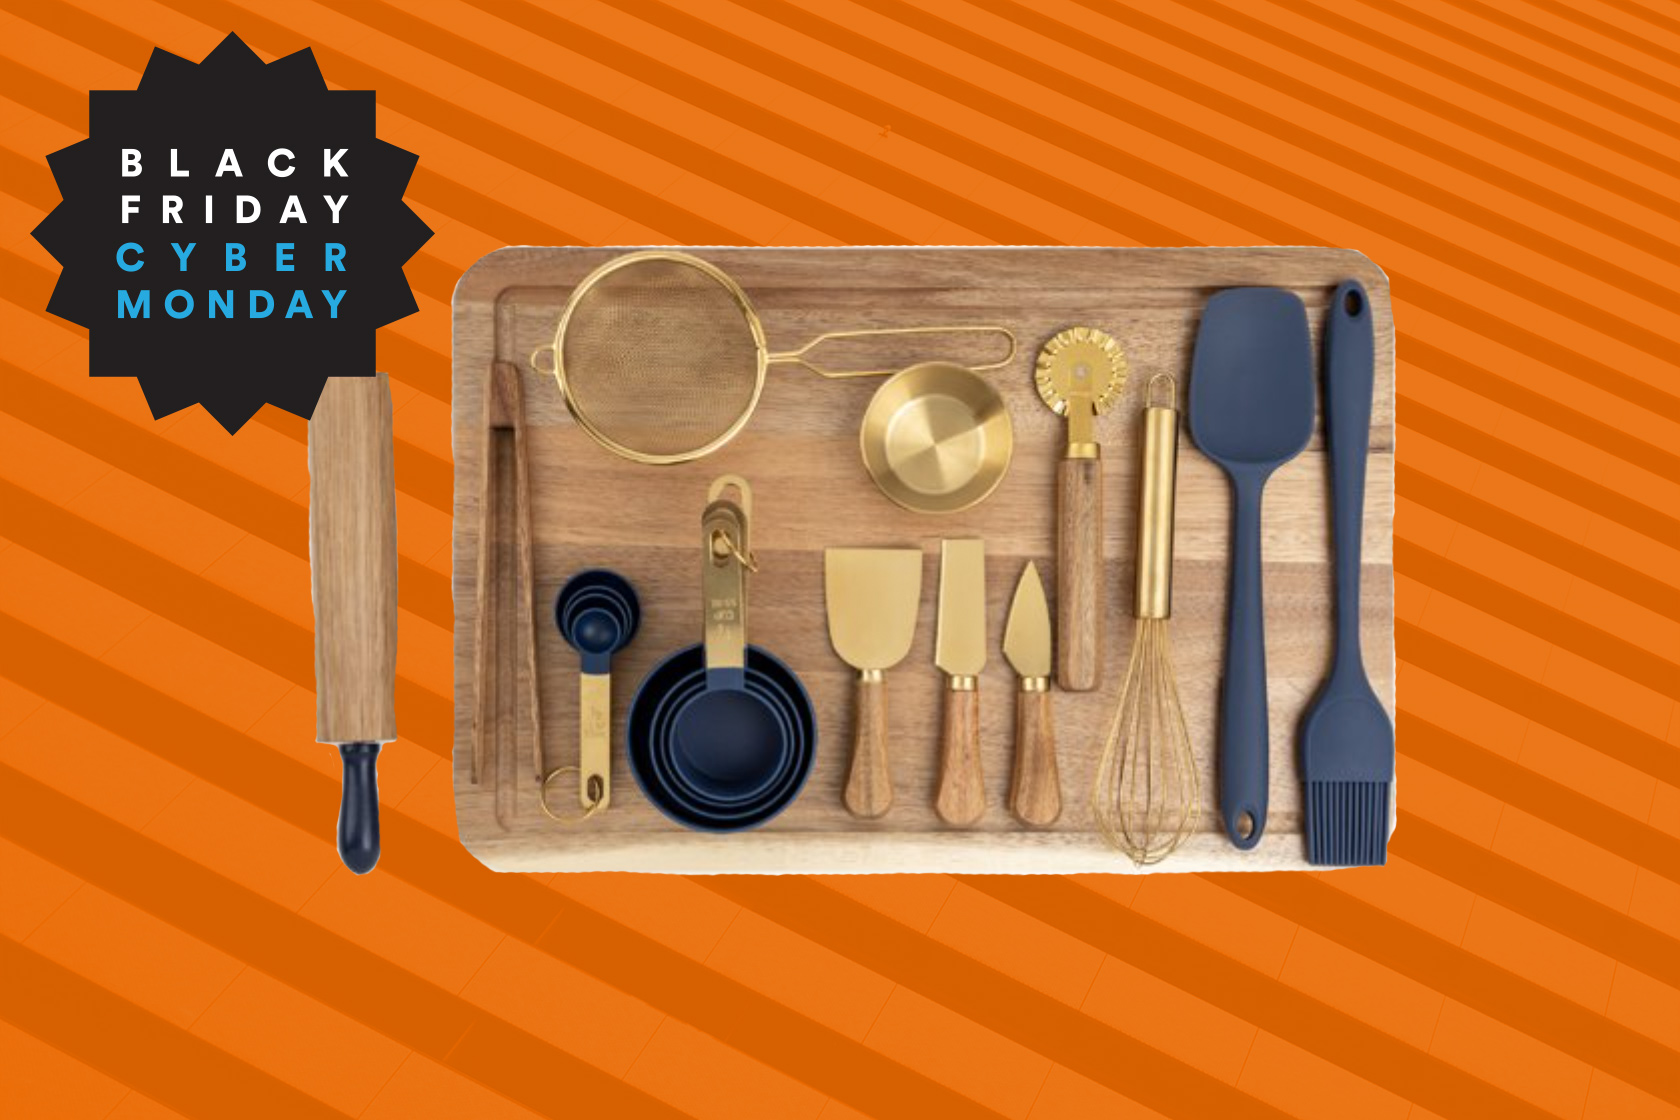 Get a Thyme & Table wood board and baking set for $30 at Walmart